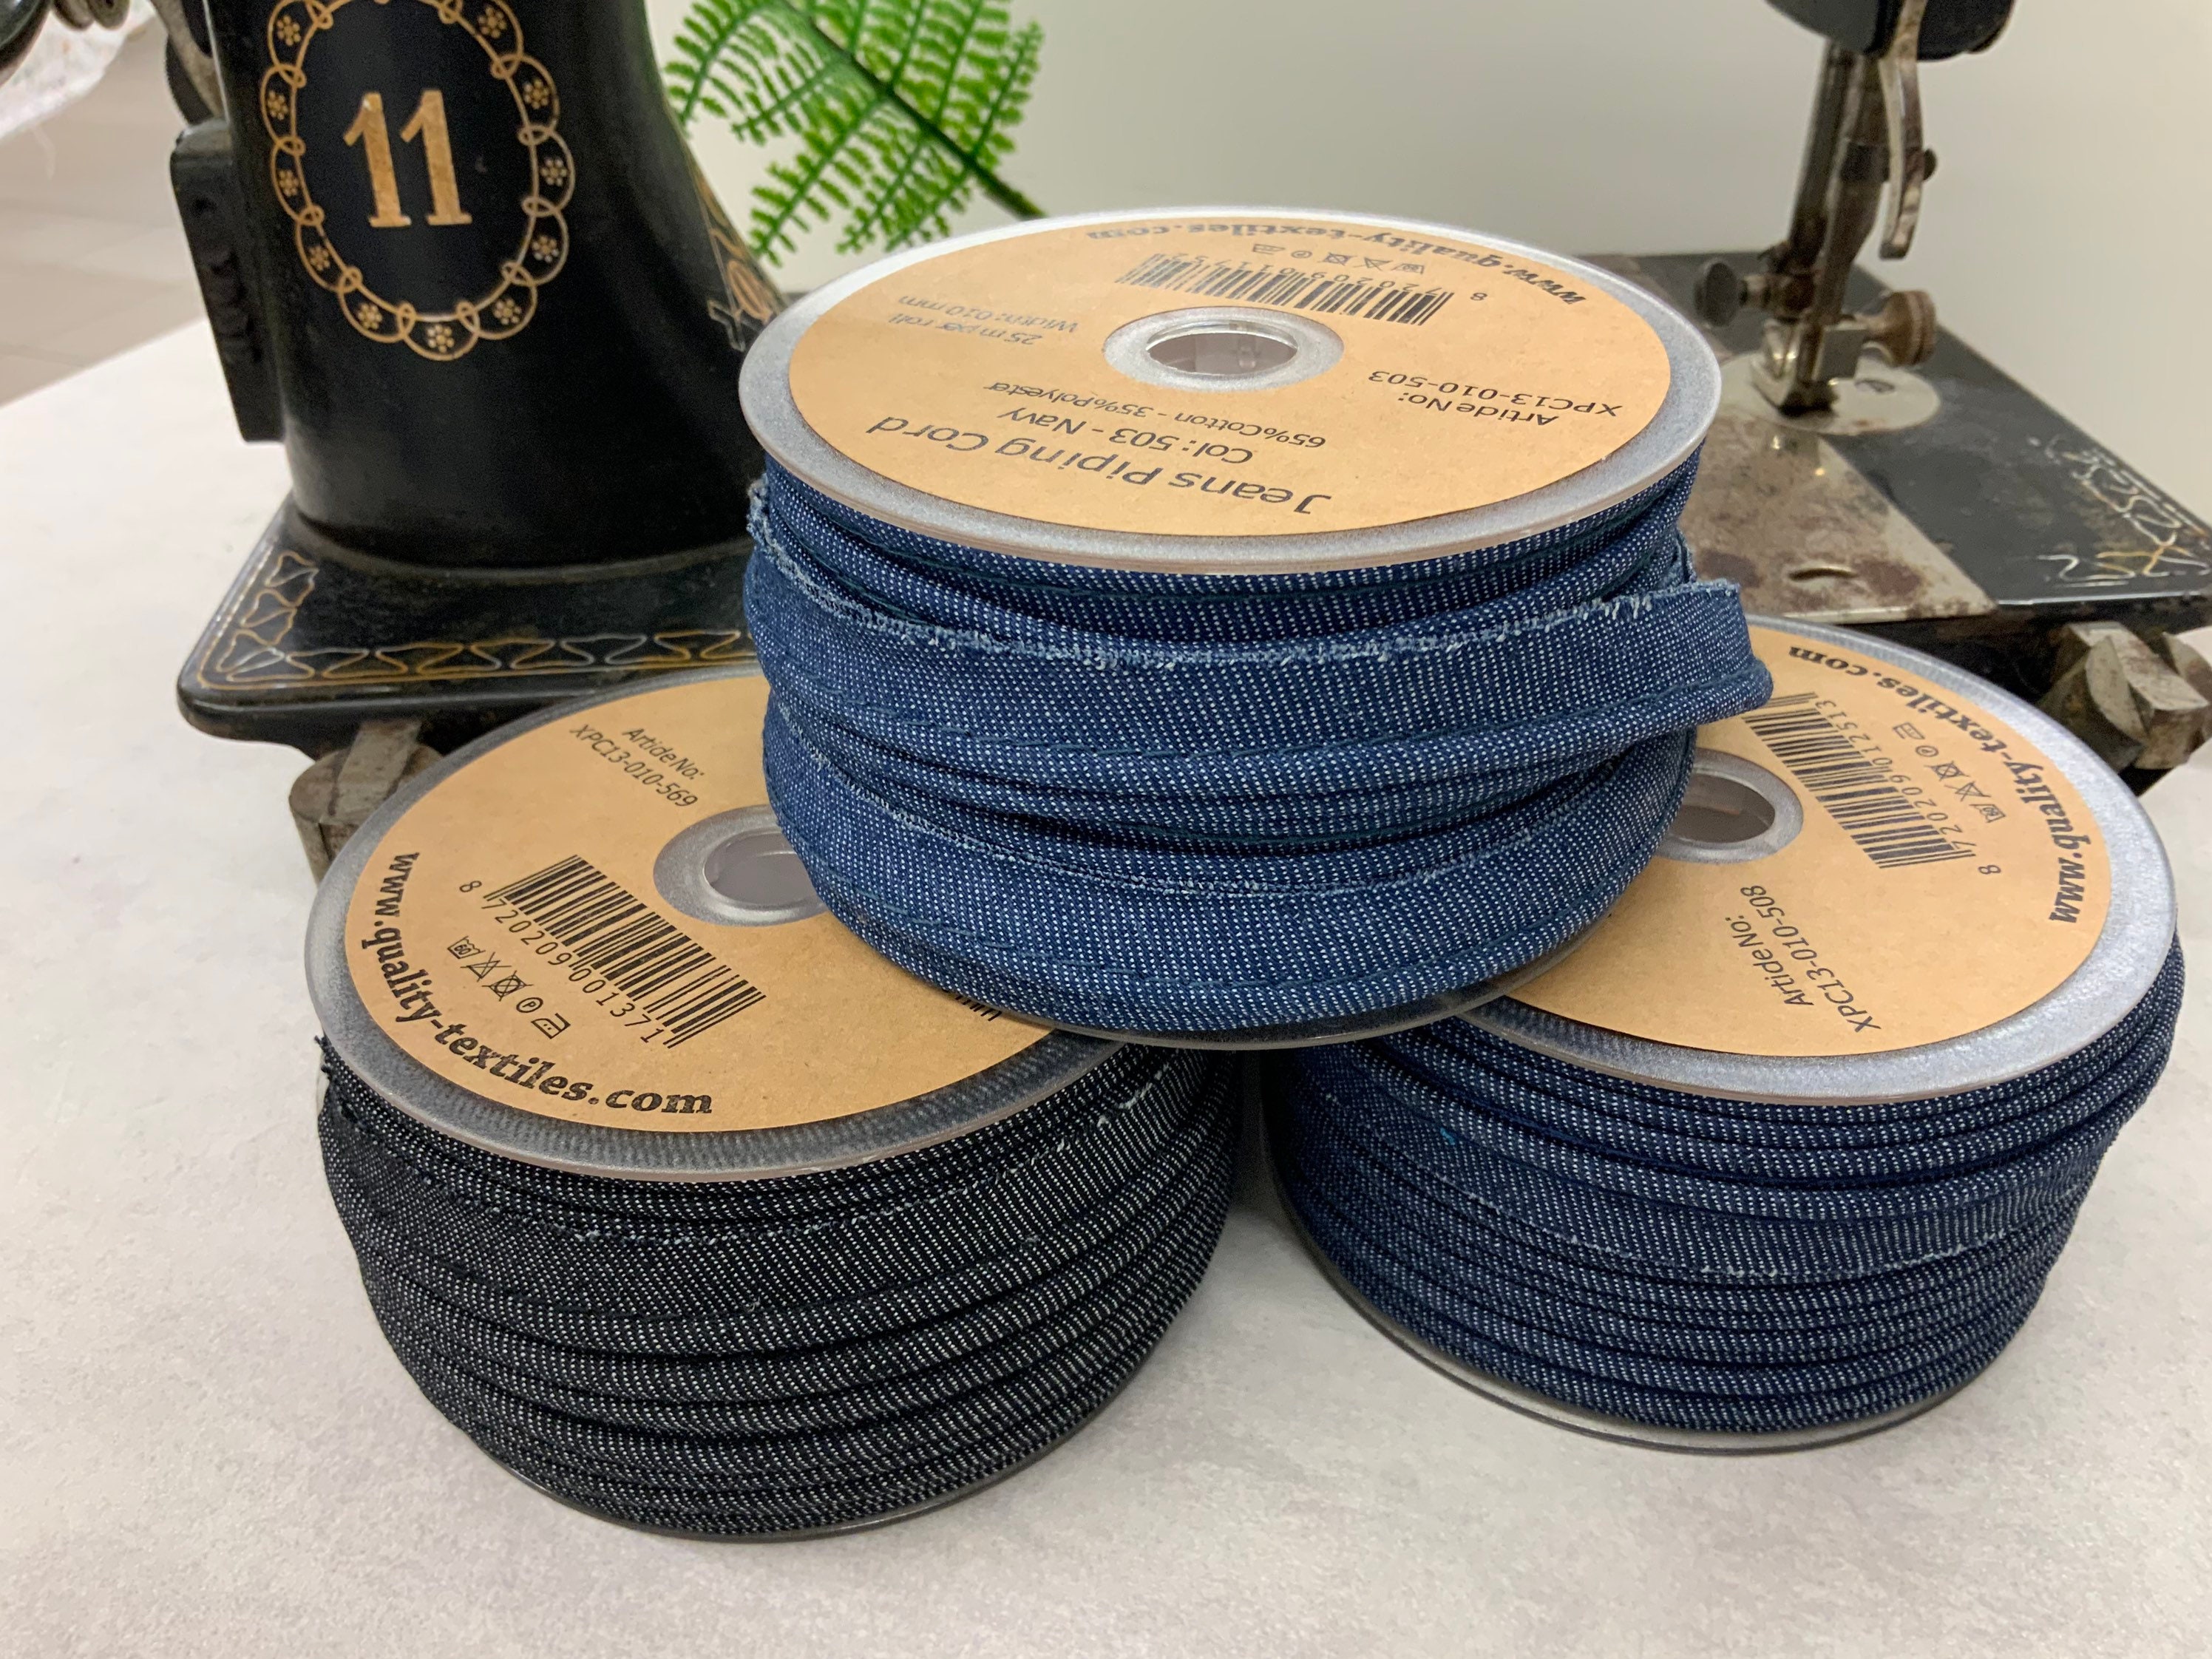 Jeans Piping Tape 3 Colors Piping or a Piping Tape Jeans, Denim Look Blue  and Black for Sewing for Pillows, Clothing, Sold by the Meter 